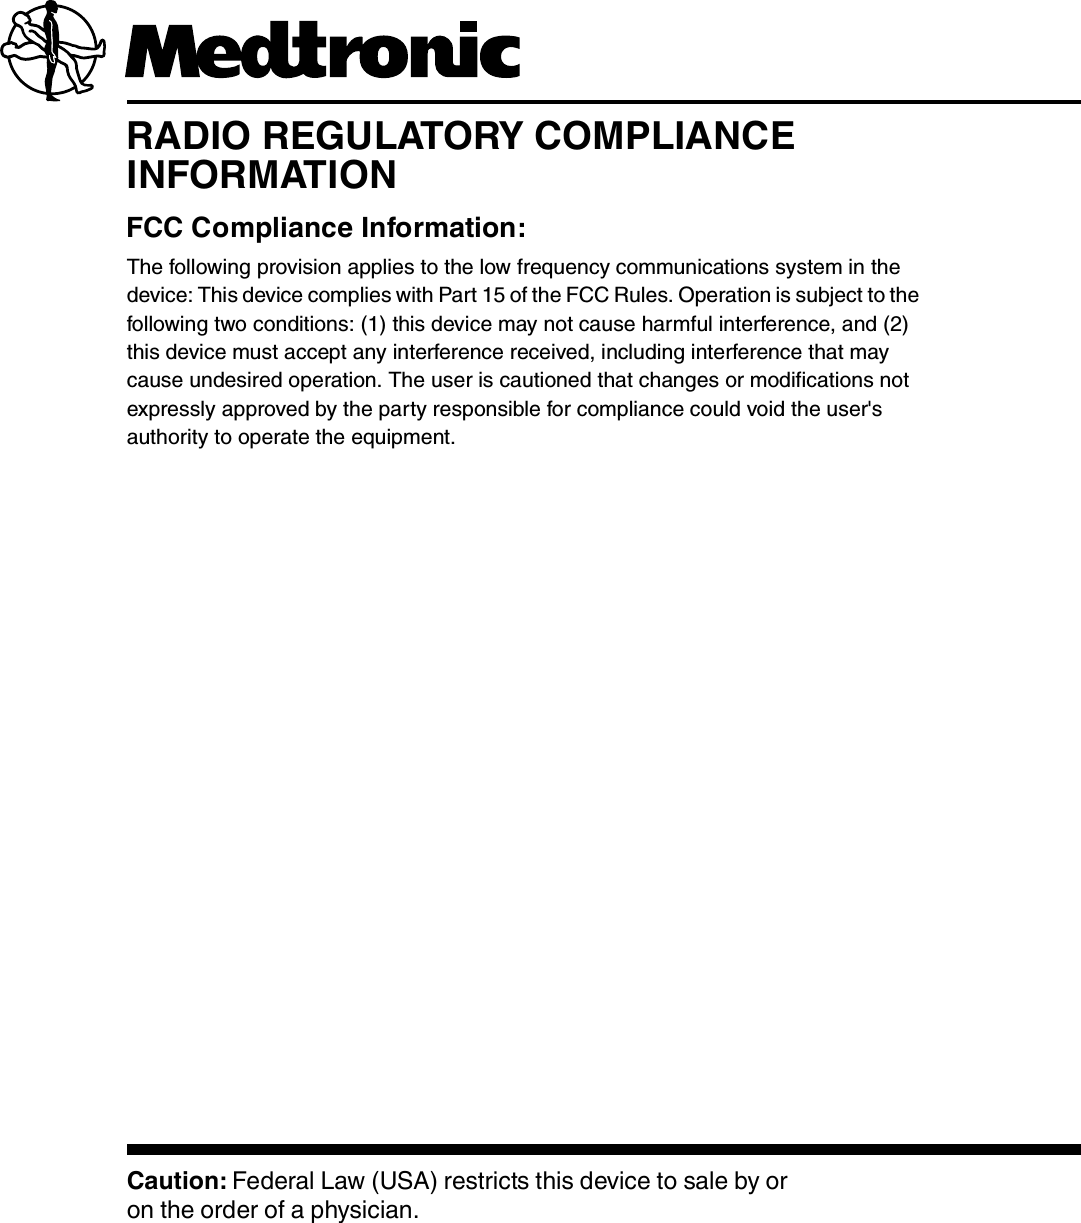 RADIO REGULATORY COMPLIANCE INFORMATIONFCC Compliance Information:The following provision applies to the low frequency communications system in the device: This device complies with Part 15 of the FCC Rules. Operation is subject to the following two conditions: (1) this device may not cause harmful interference, and (2) this device must accept any interference received, including interference that may cause undesired operation. The user is cautioned that changes or modifications not expressly approved by the party responsible for compliance could void the user&apos;s authority to operate the equipment.Caution: Federal Law (USA) restricts this device to sale by or on the order of a physician.